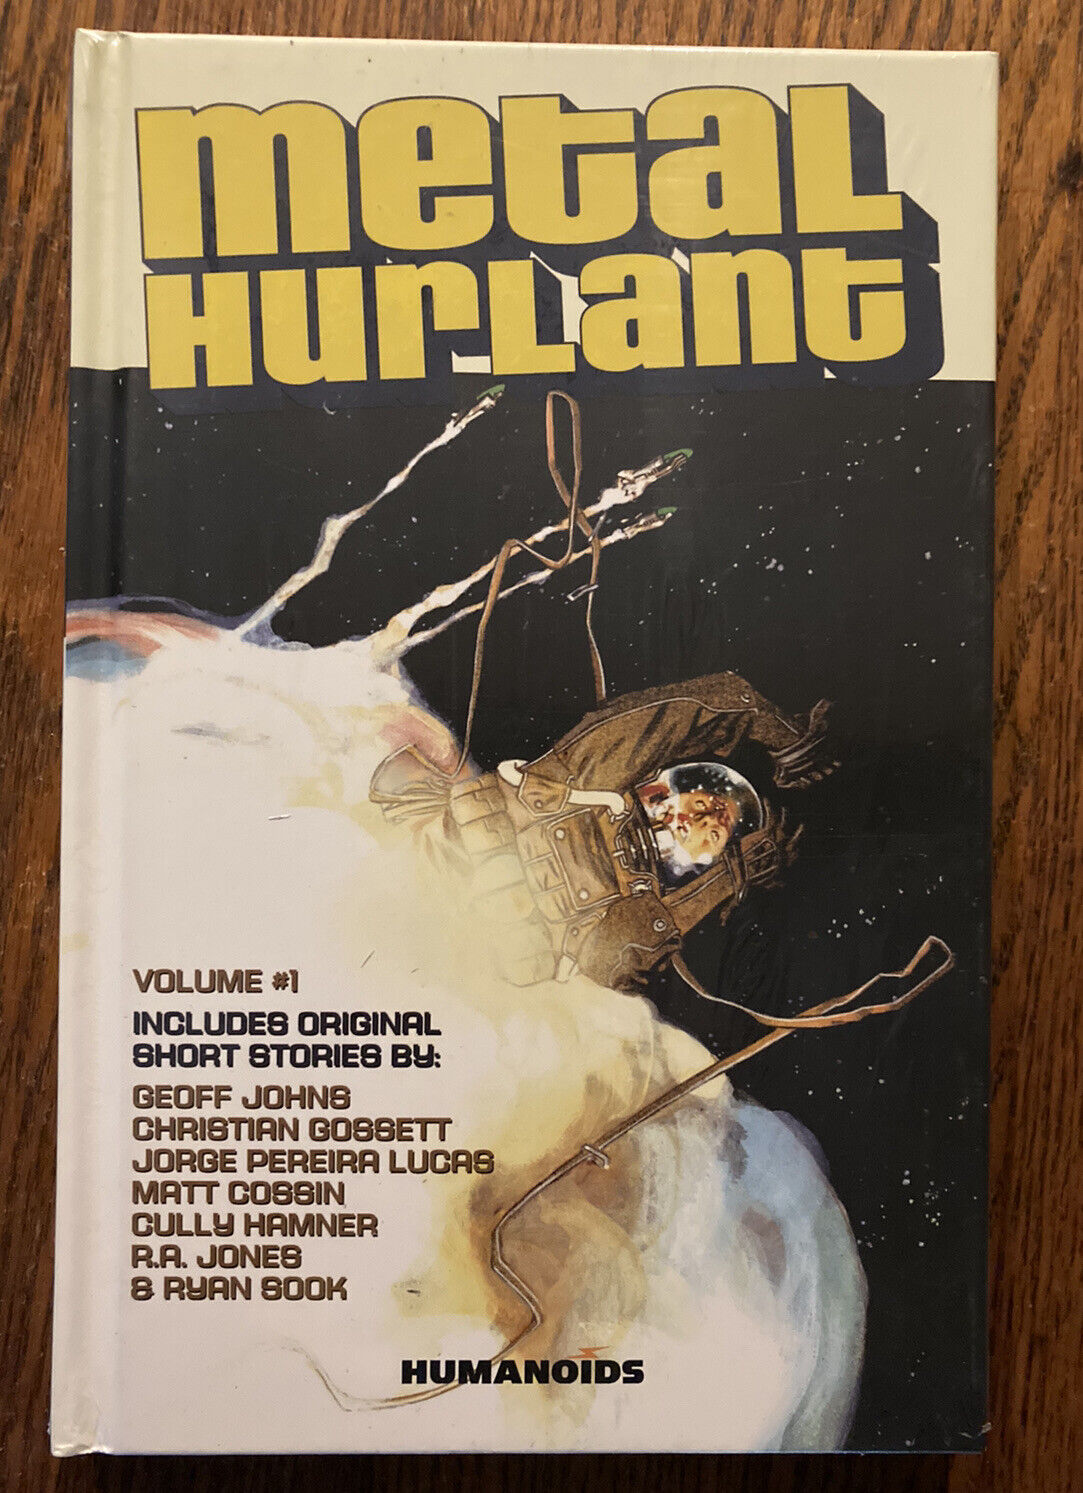 Metal Huriant Vol 1 (BRAND NEW SEALED 2011 Hardcover Humanoids)